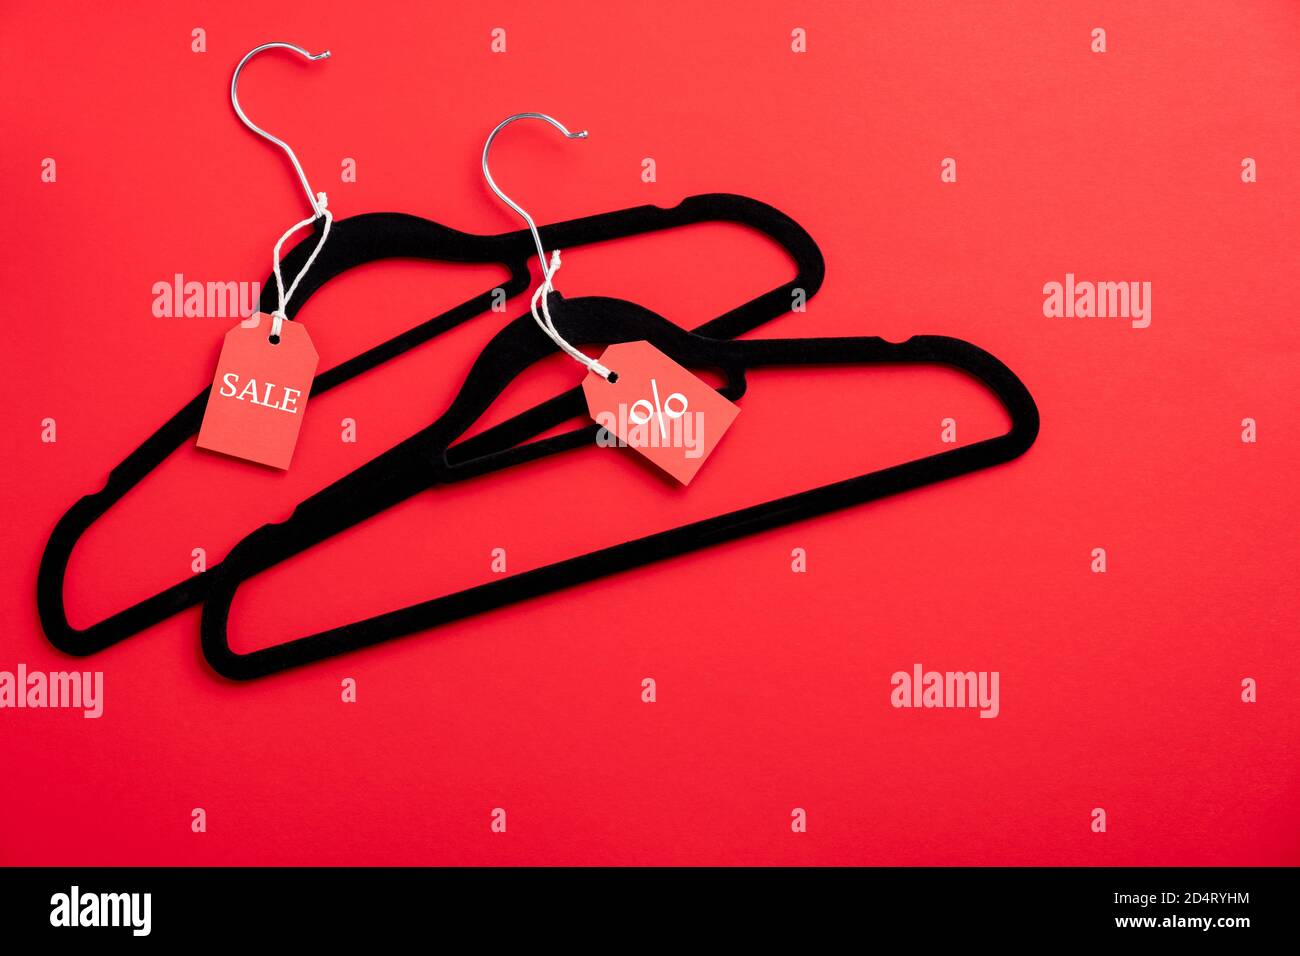 Two coat hangers on red background. Flat lay, top view. Black Friday sale, discount, outlet in fashion store concept. Stock Photo